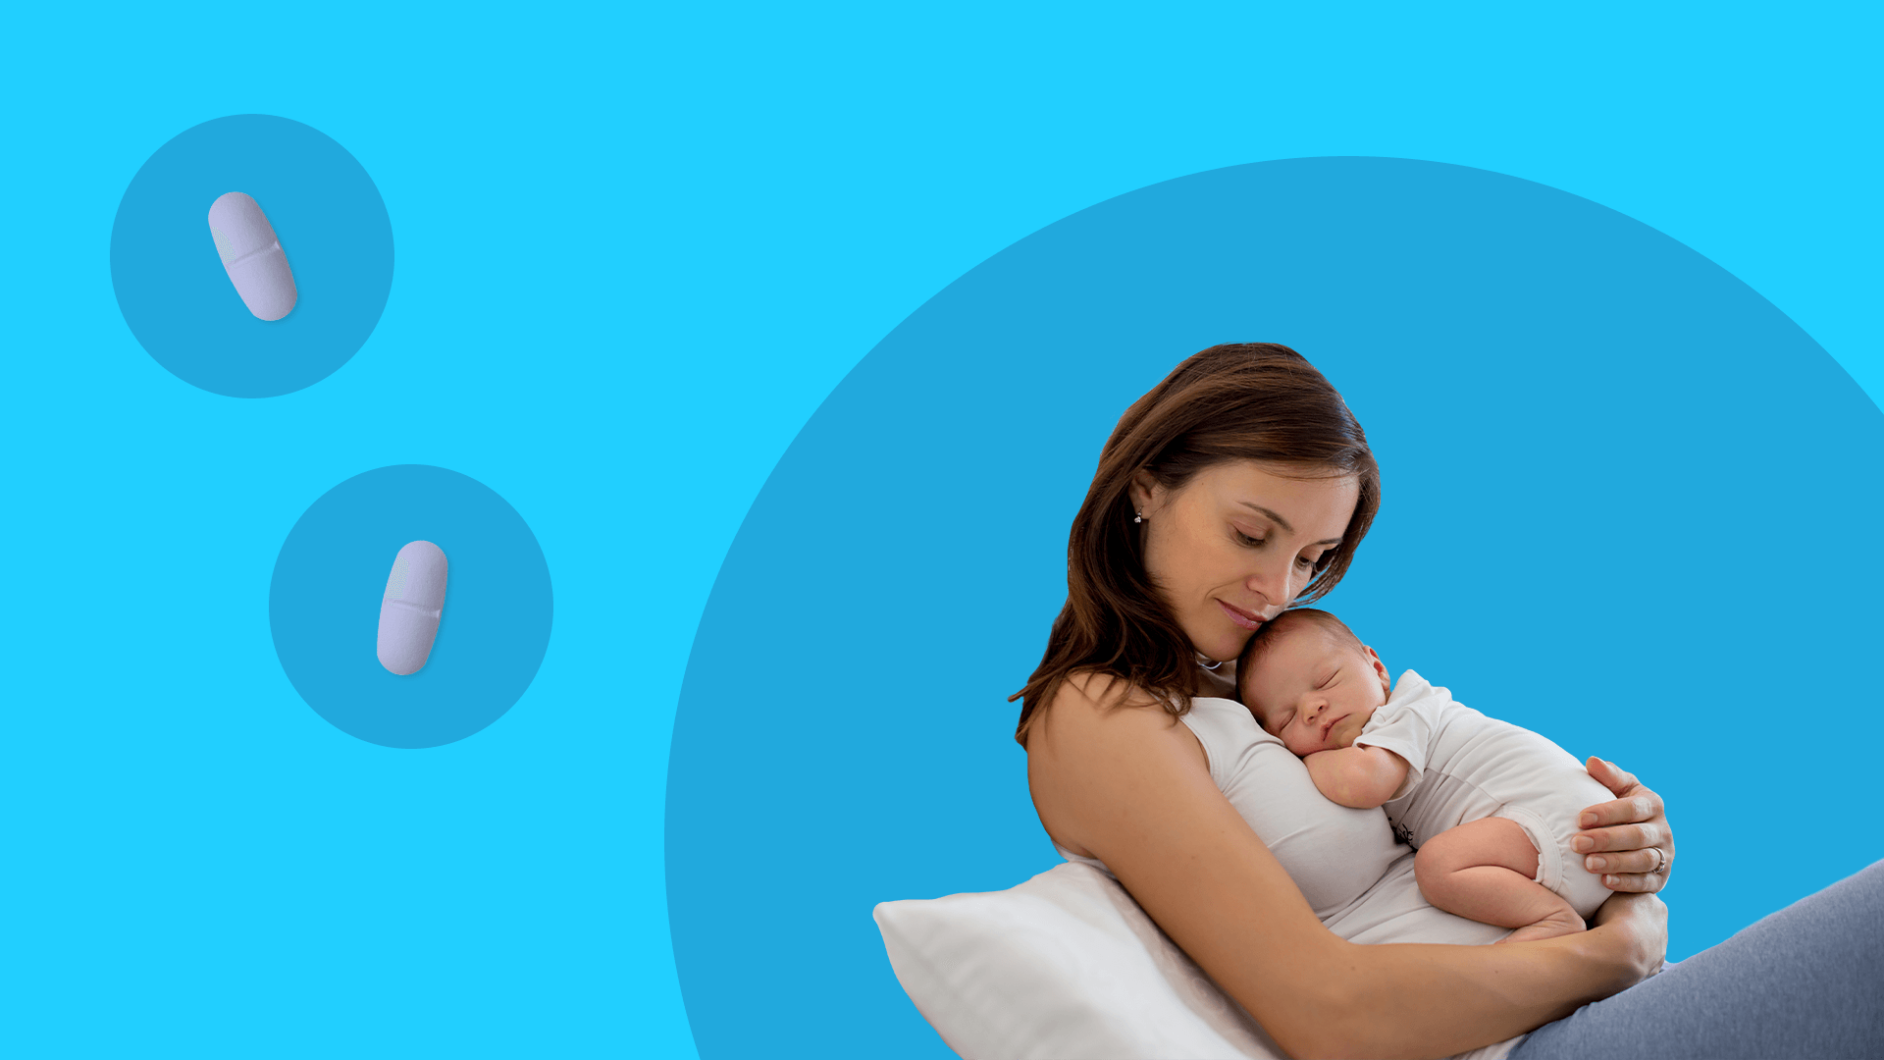 A woman with a baby and pills represents taking Zoloft while breastfeeding